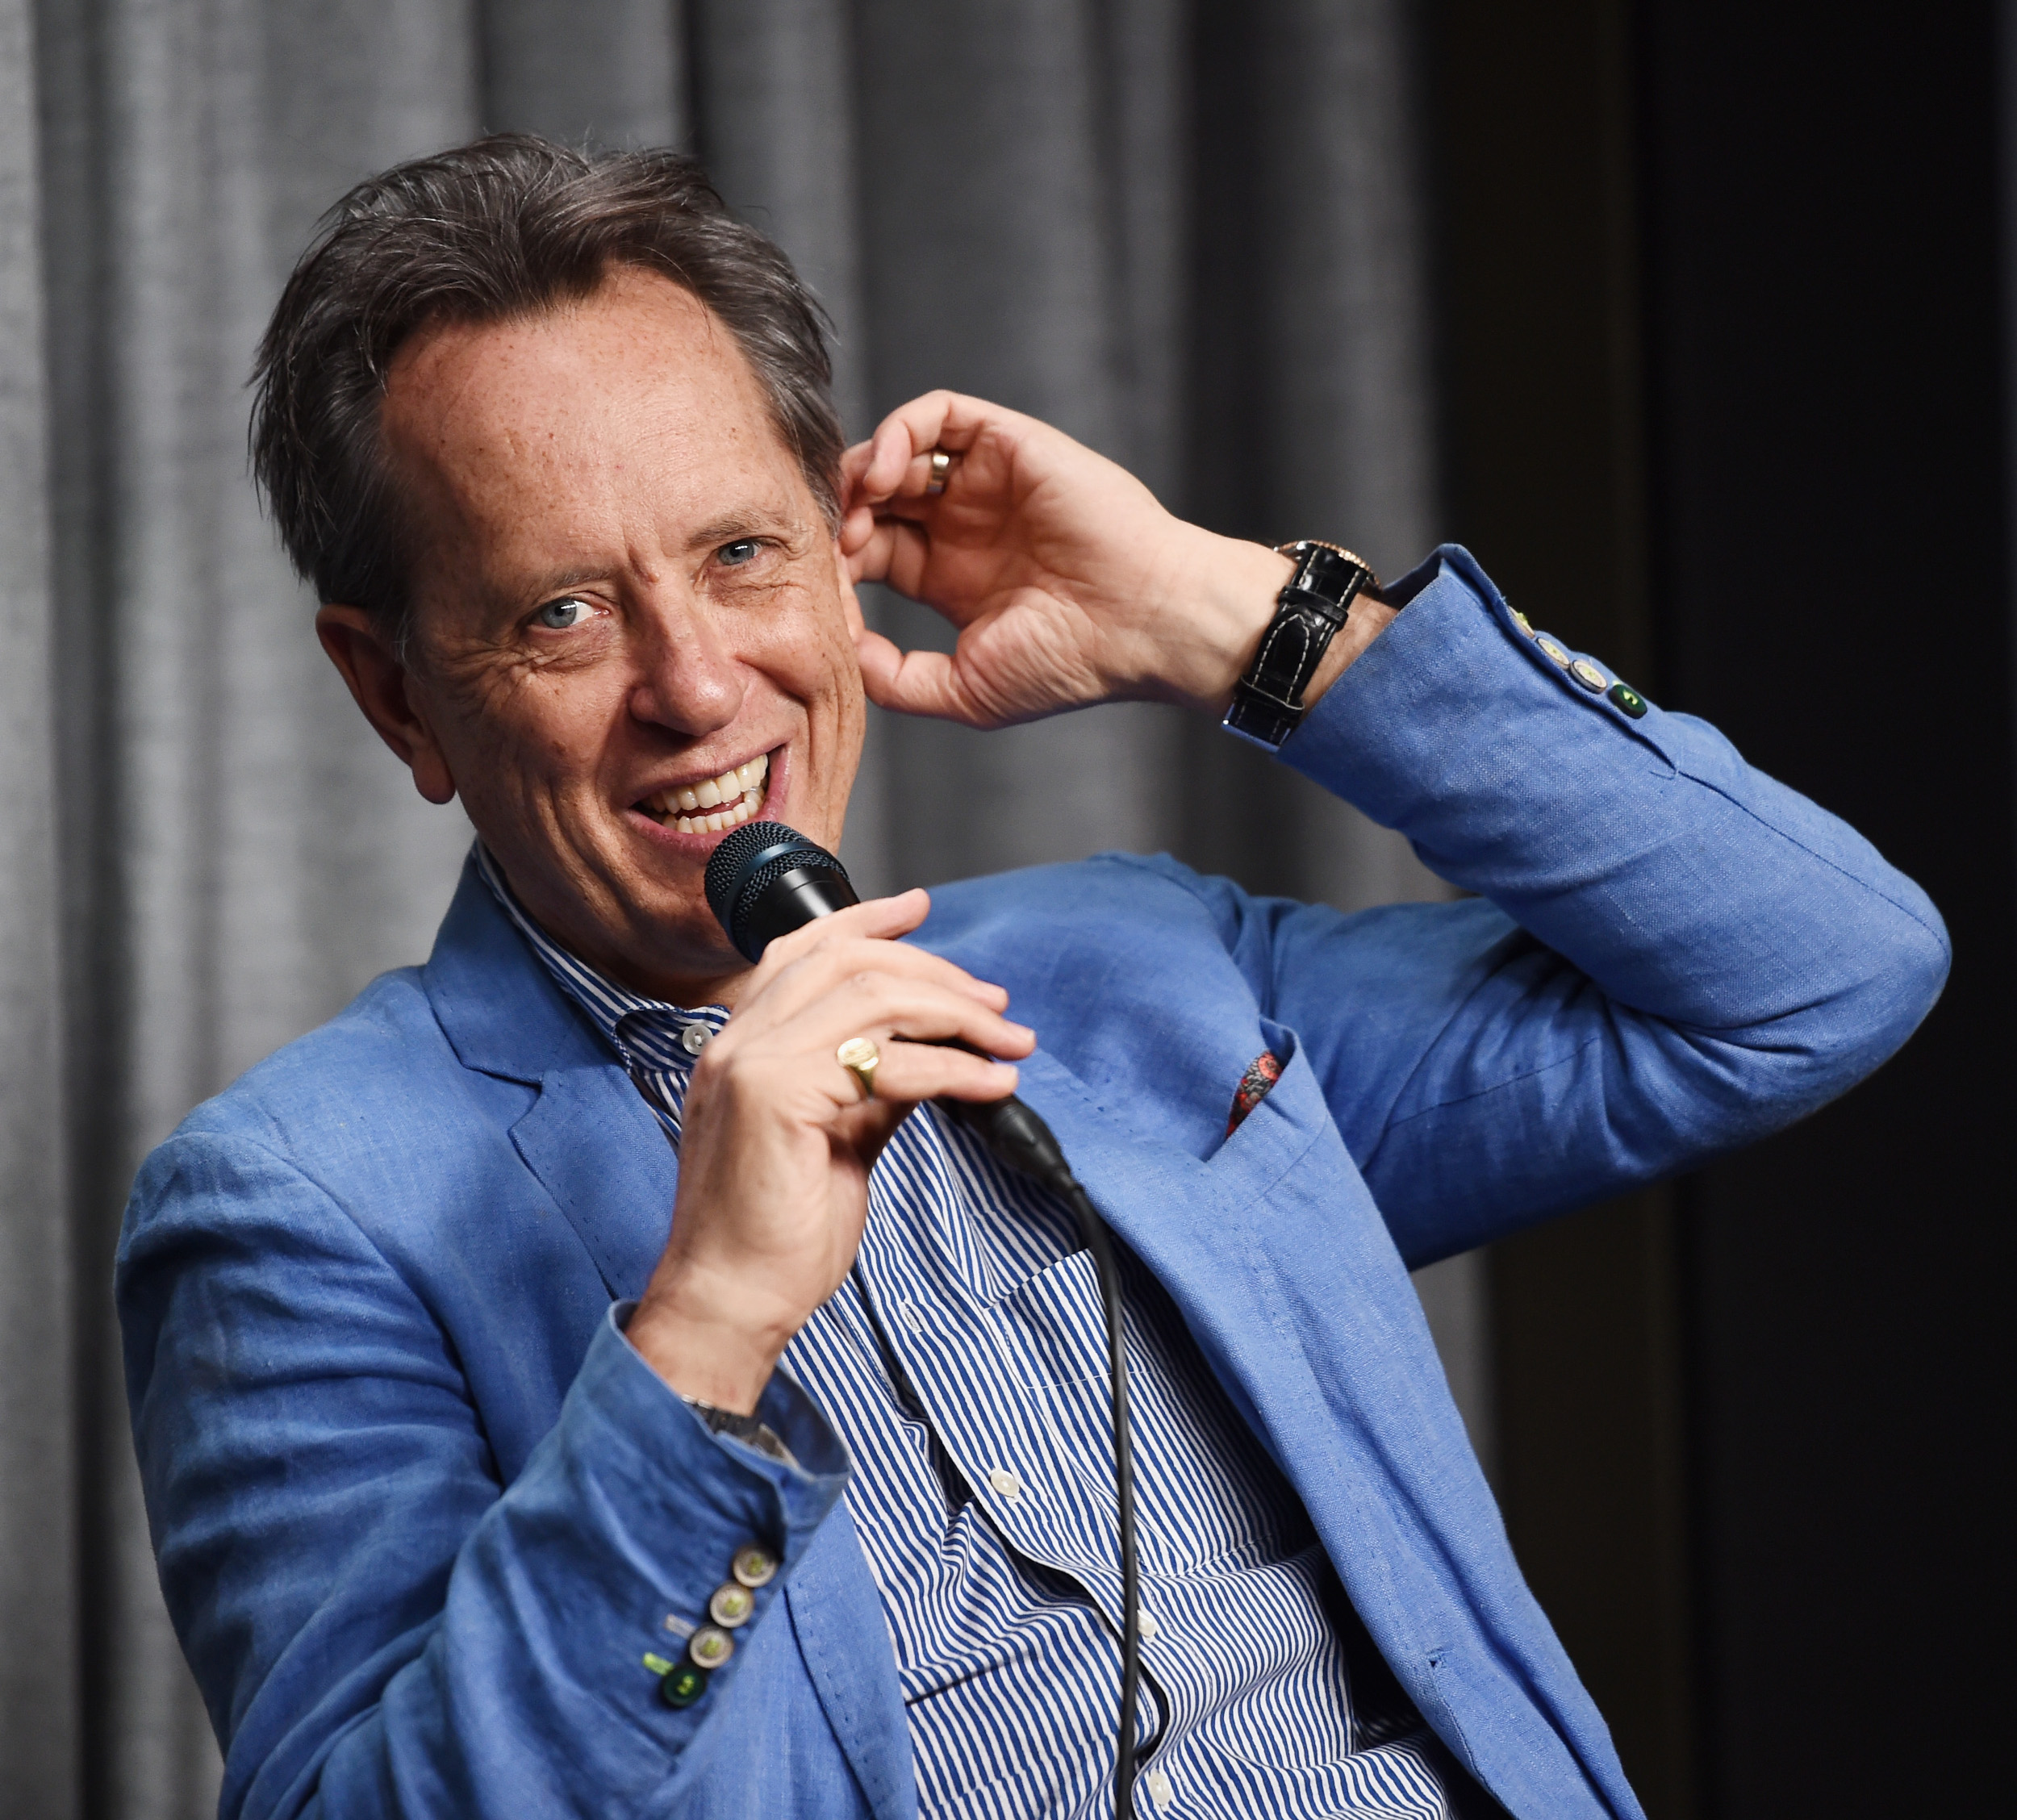 Richard E. Grant wearing a blue shirt, raising one arm, and holding a microphone in the other